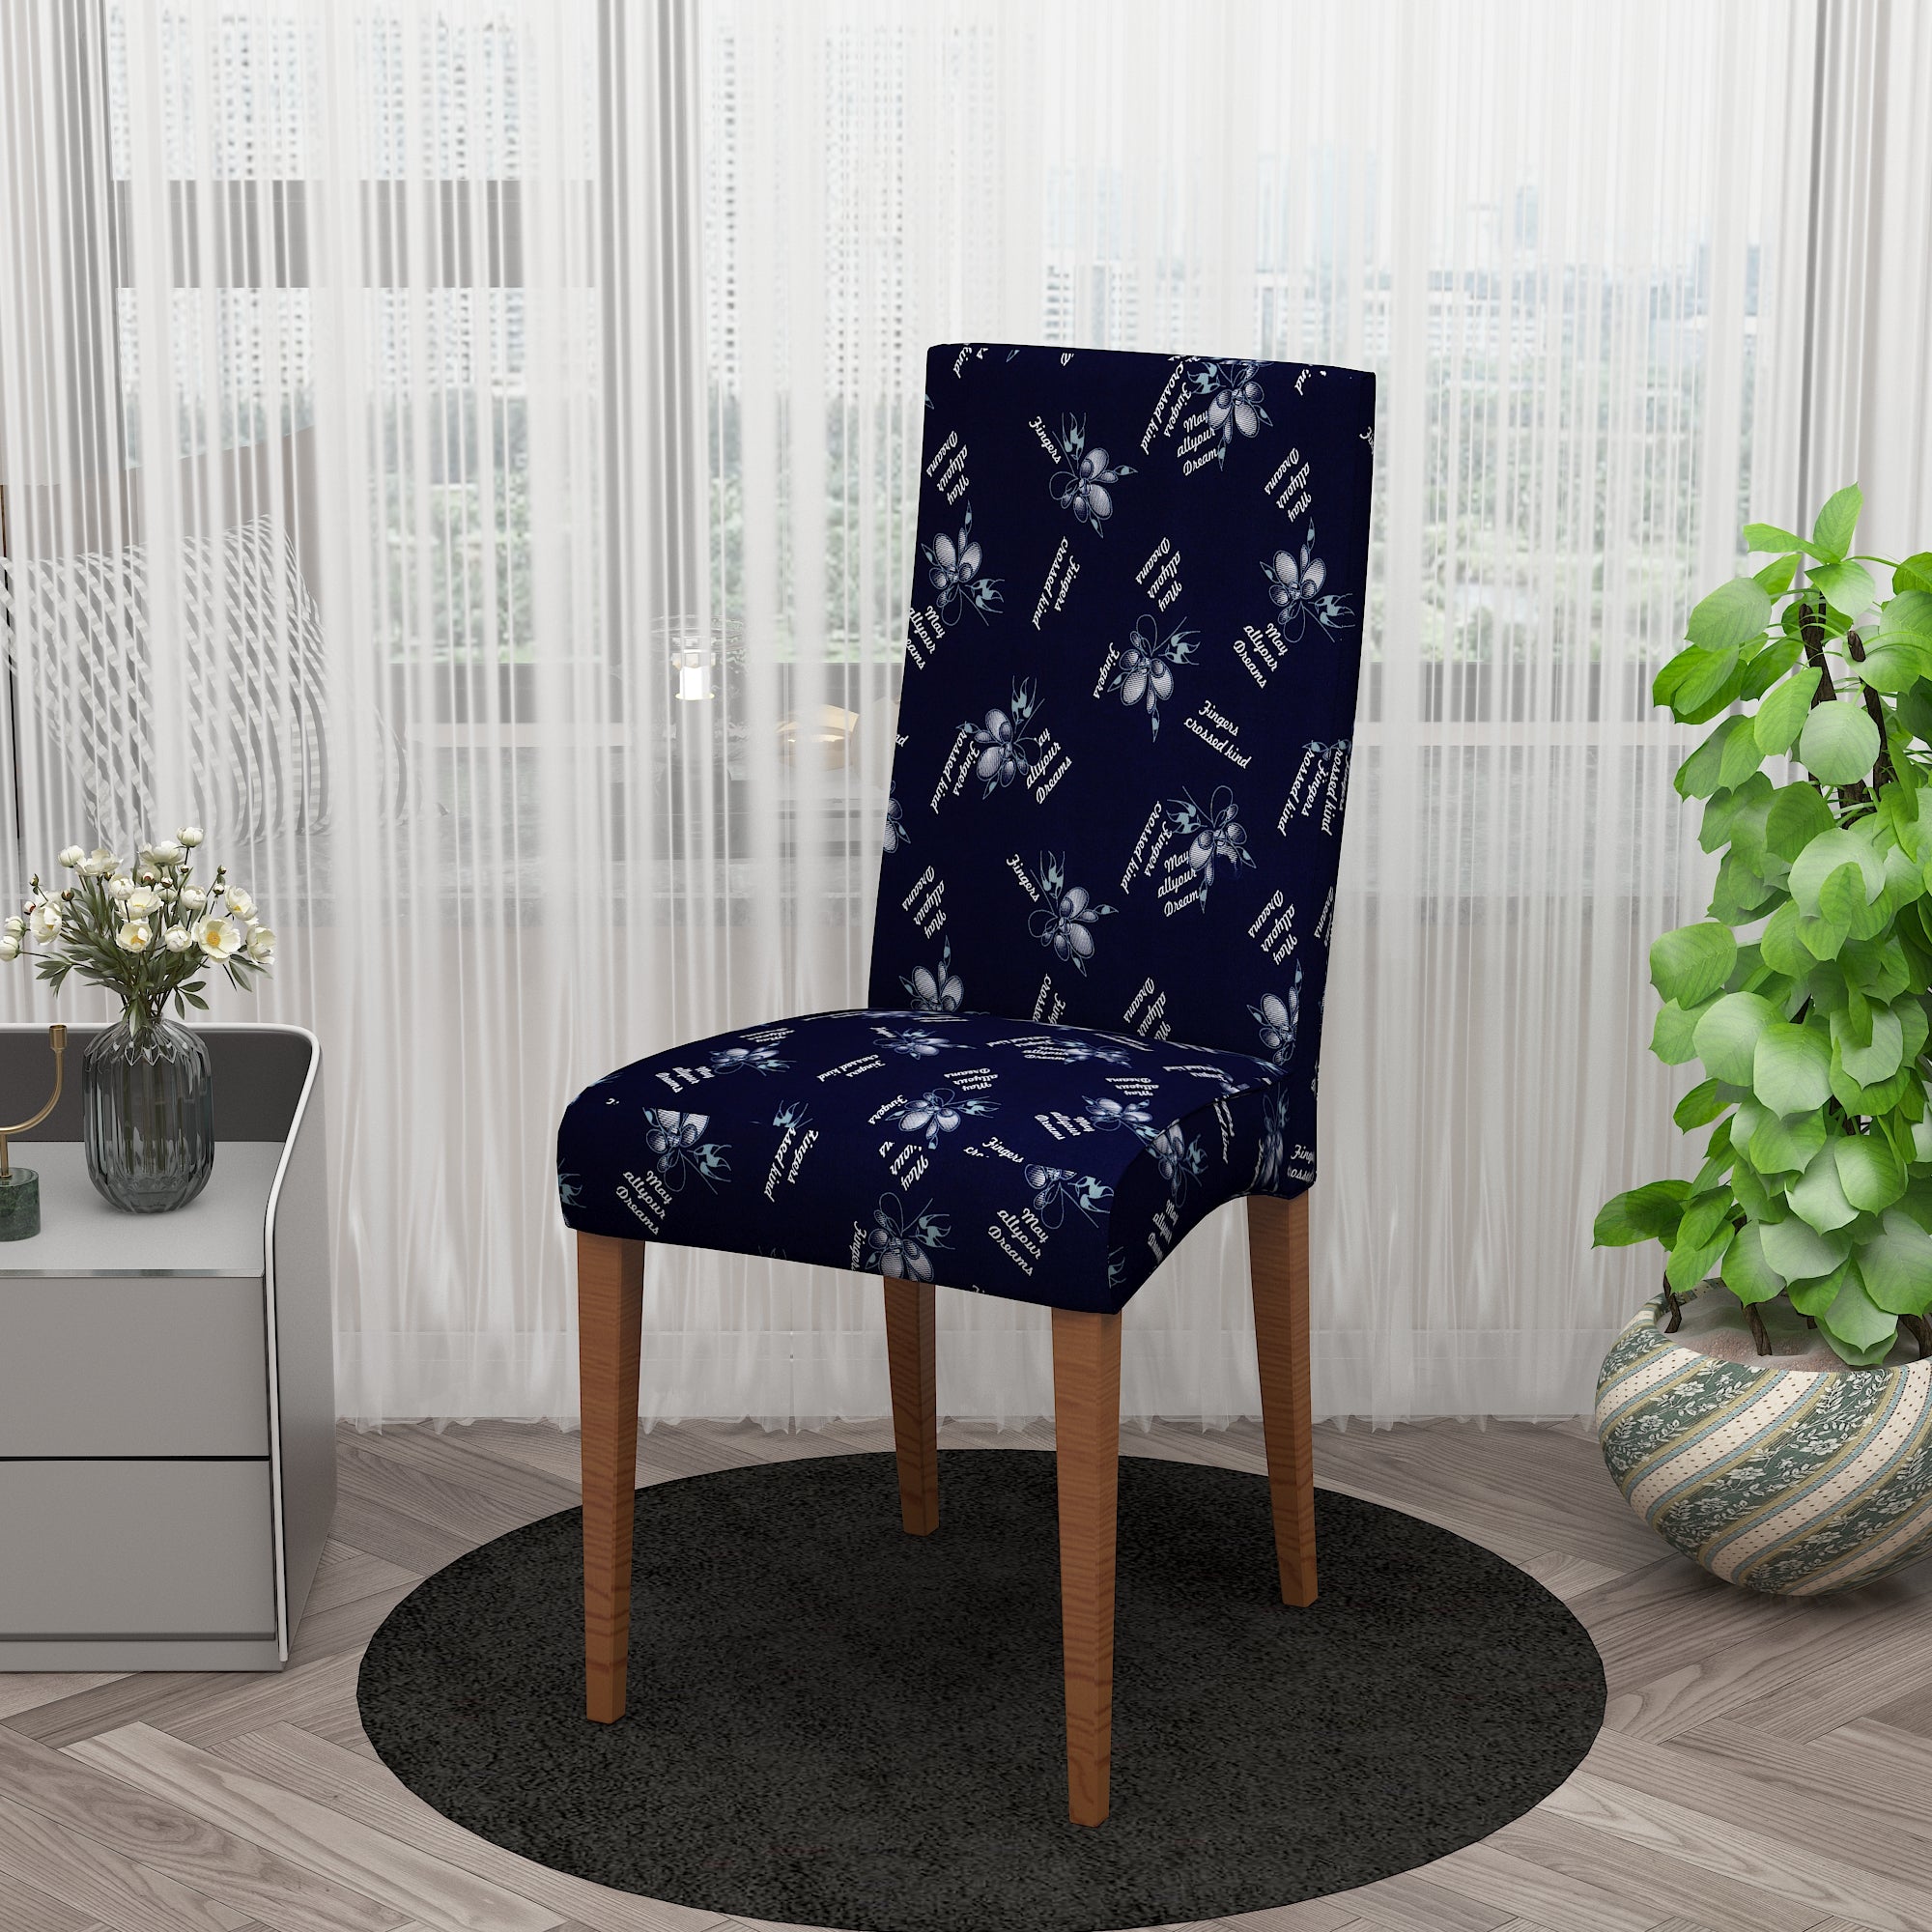 Polyester Spandex Stretchable Printed Chair Cover, MG35